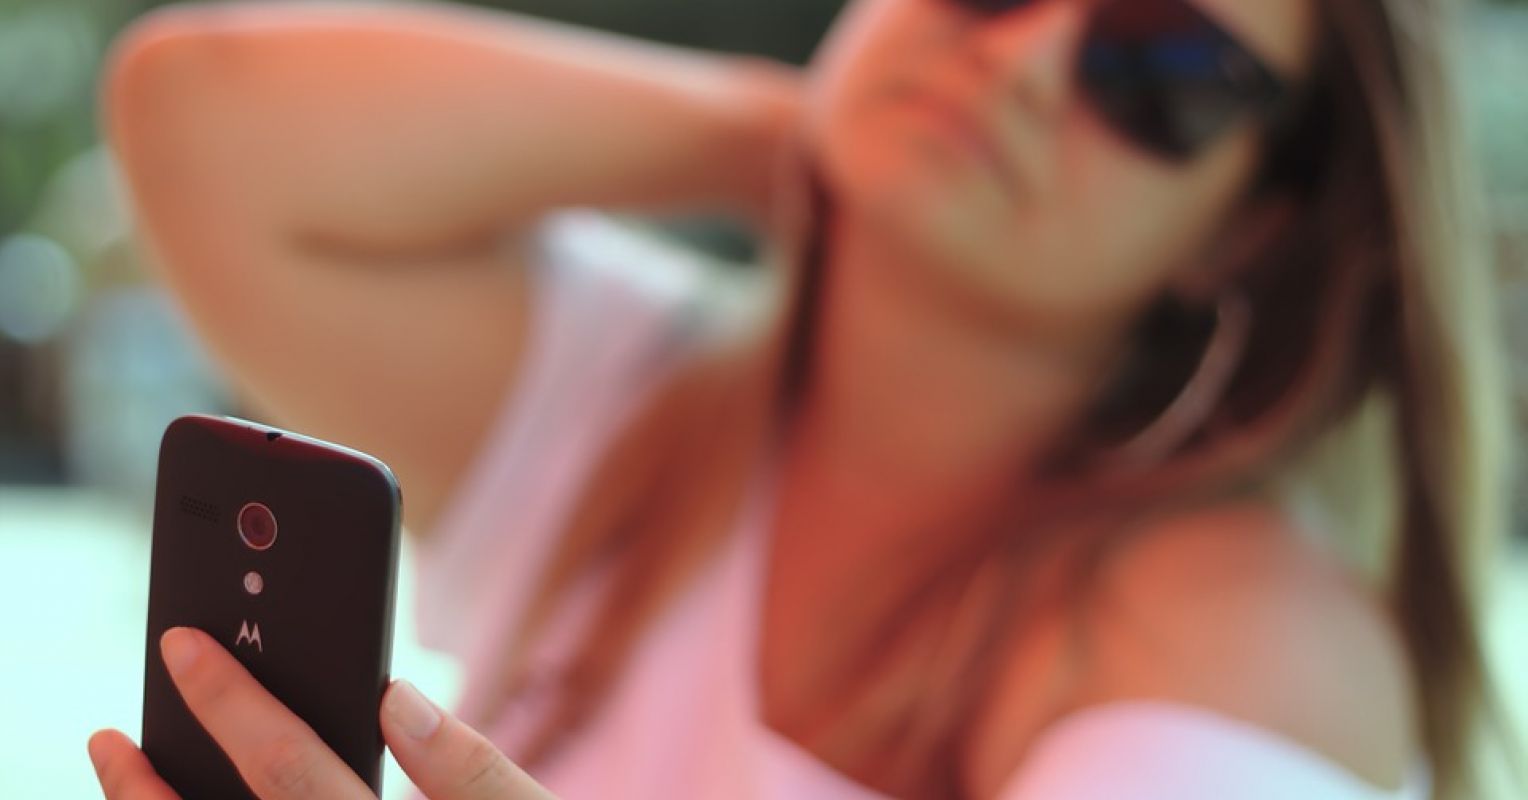 We Can't Stop Teens From Sexting | Psychology Today